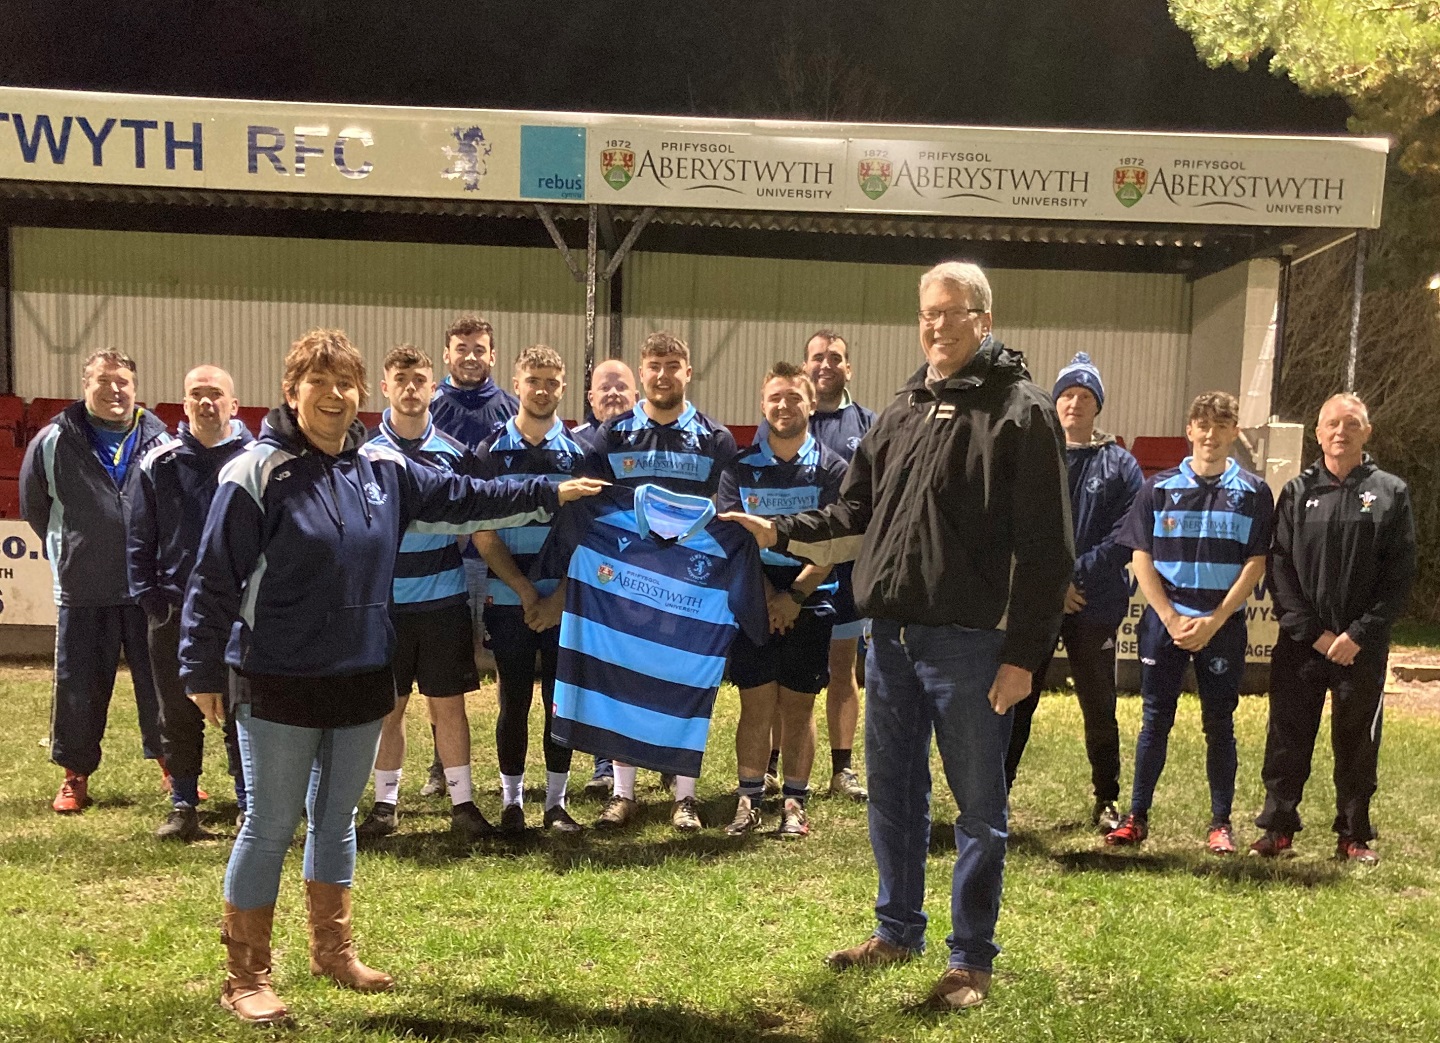 Pictured are Nerys Hywel, Club Chair receiving the new Aberystwyth RFC Athletic and Youth team shirts from Professor Tim Woods, Pro Vice-Chancellor for Learning, Teaching and Student Experience at Aberystwyth University, Coaches. Also pictured are players, including Club Captain Arwel Lloyd and Vice-Captain Matthew Hughes.